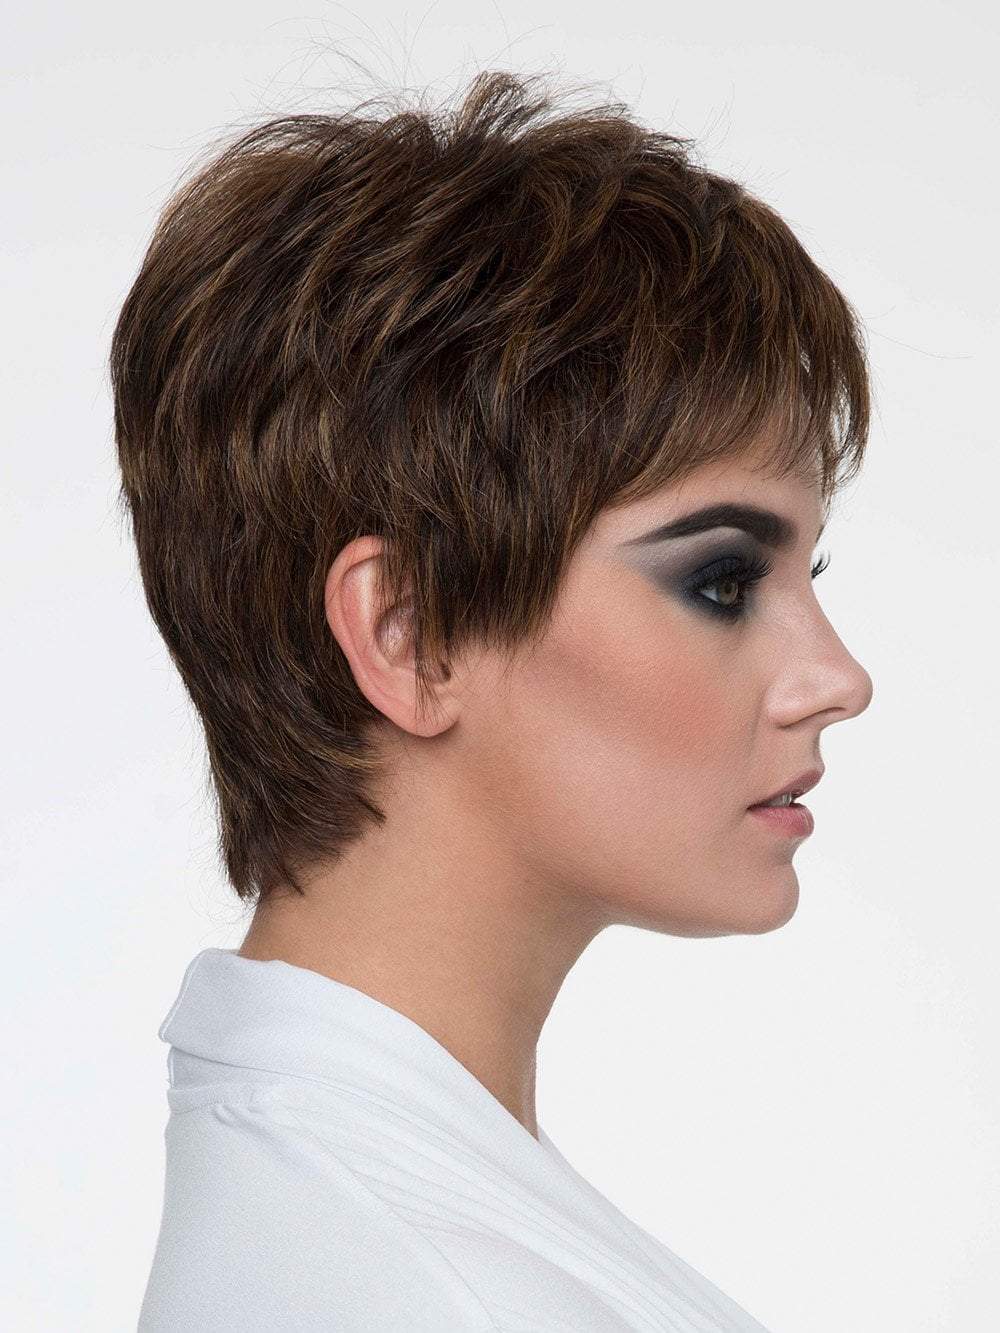 Always be in style with her classic pixie cut and sassy, piecey bangs